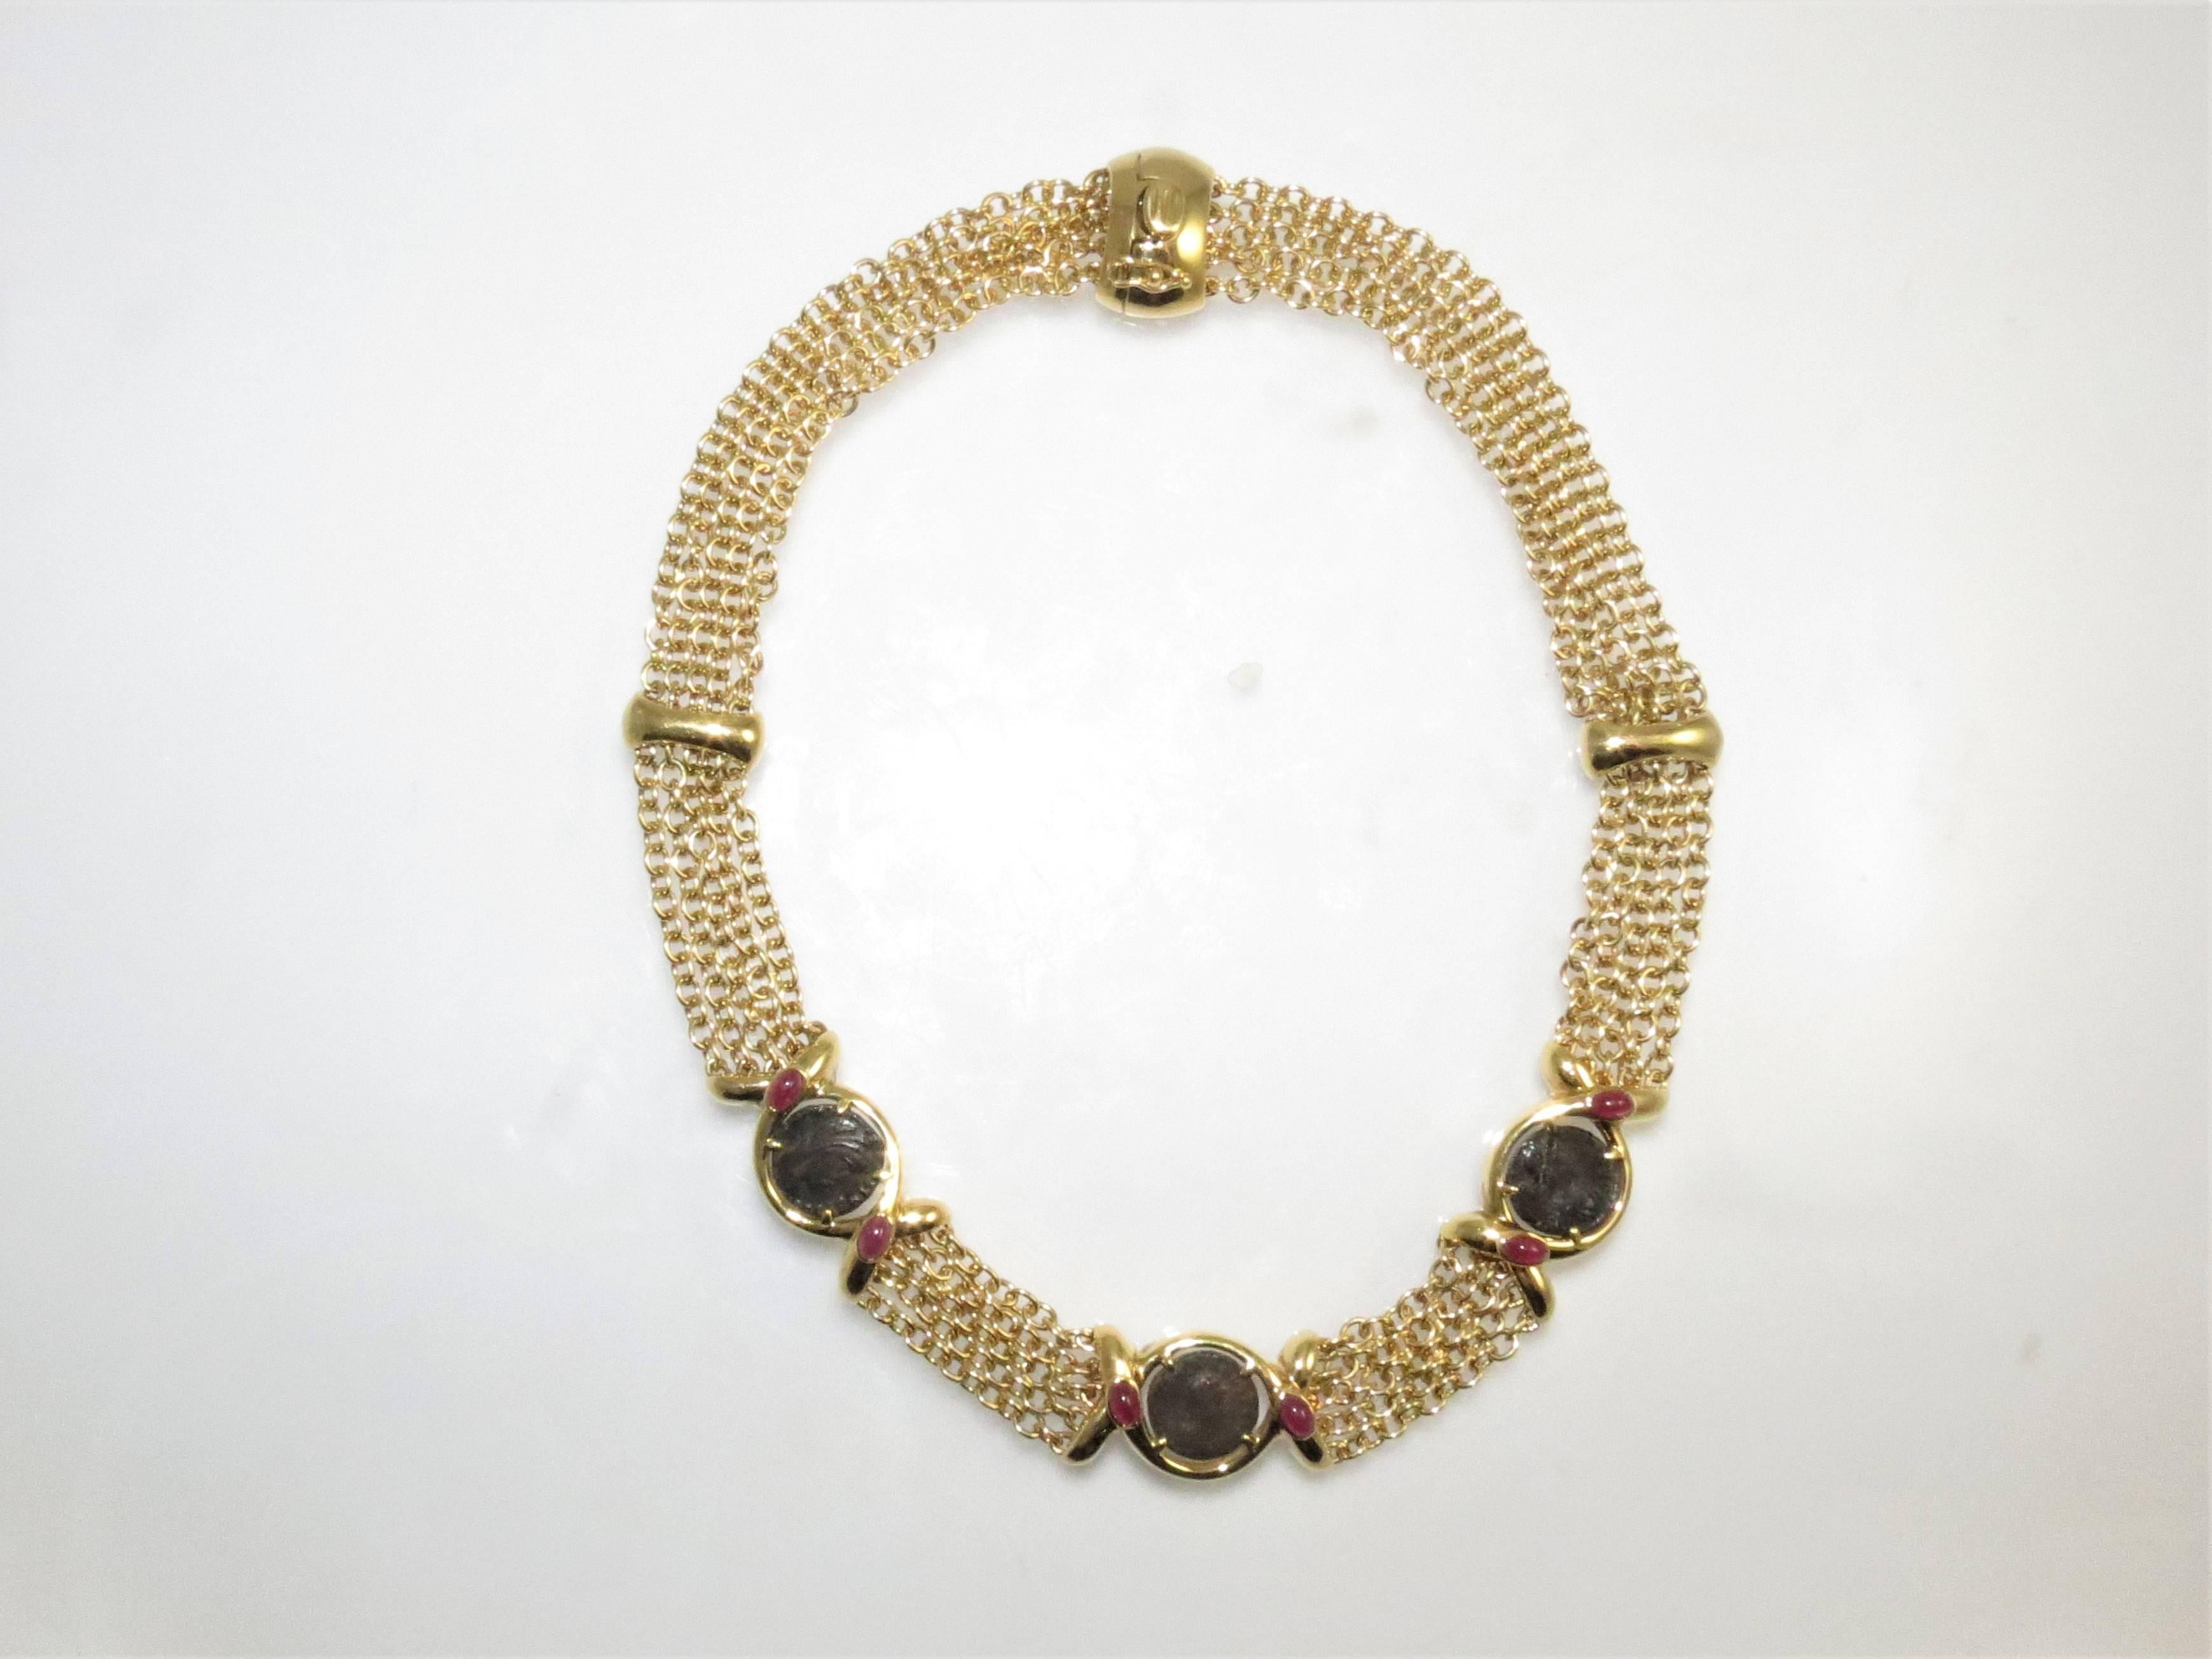 18K yellow gold, five strand necklace with three Ancient Roman coins and 6 cabochon rubies weighing approximately 1.20cts total